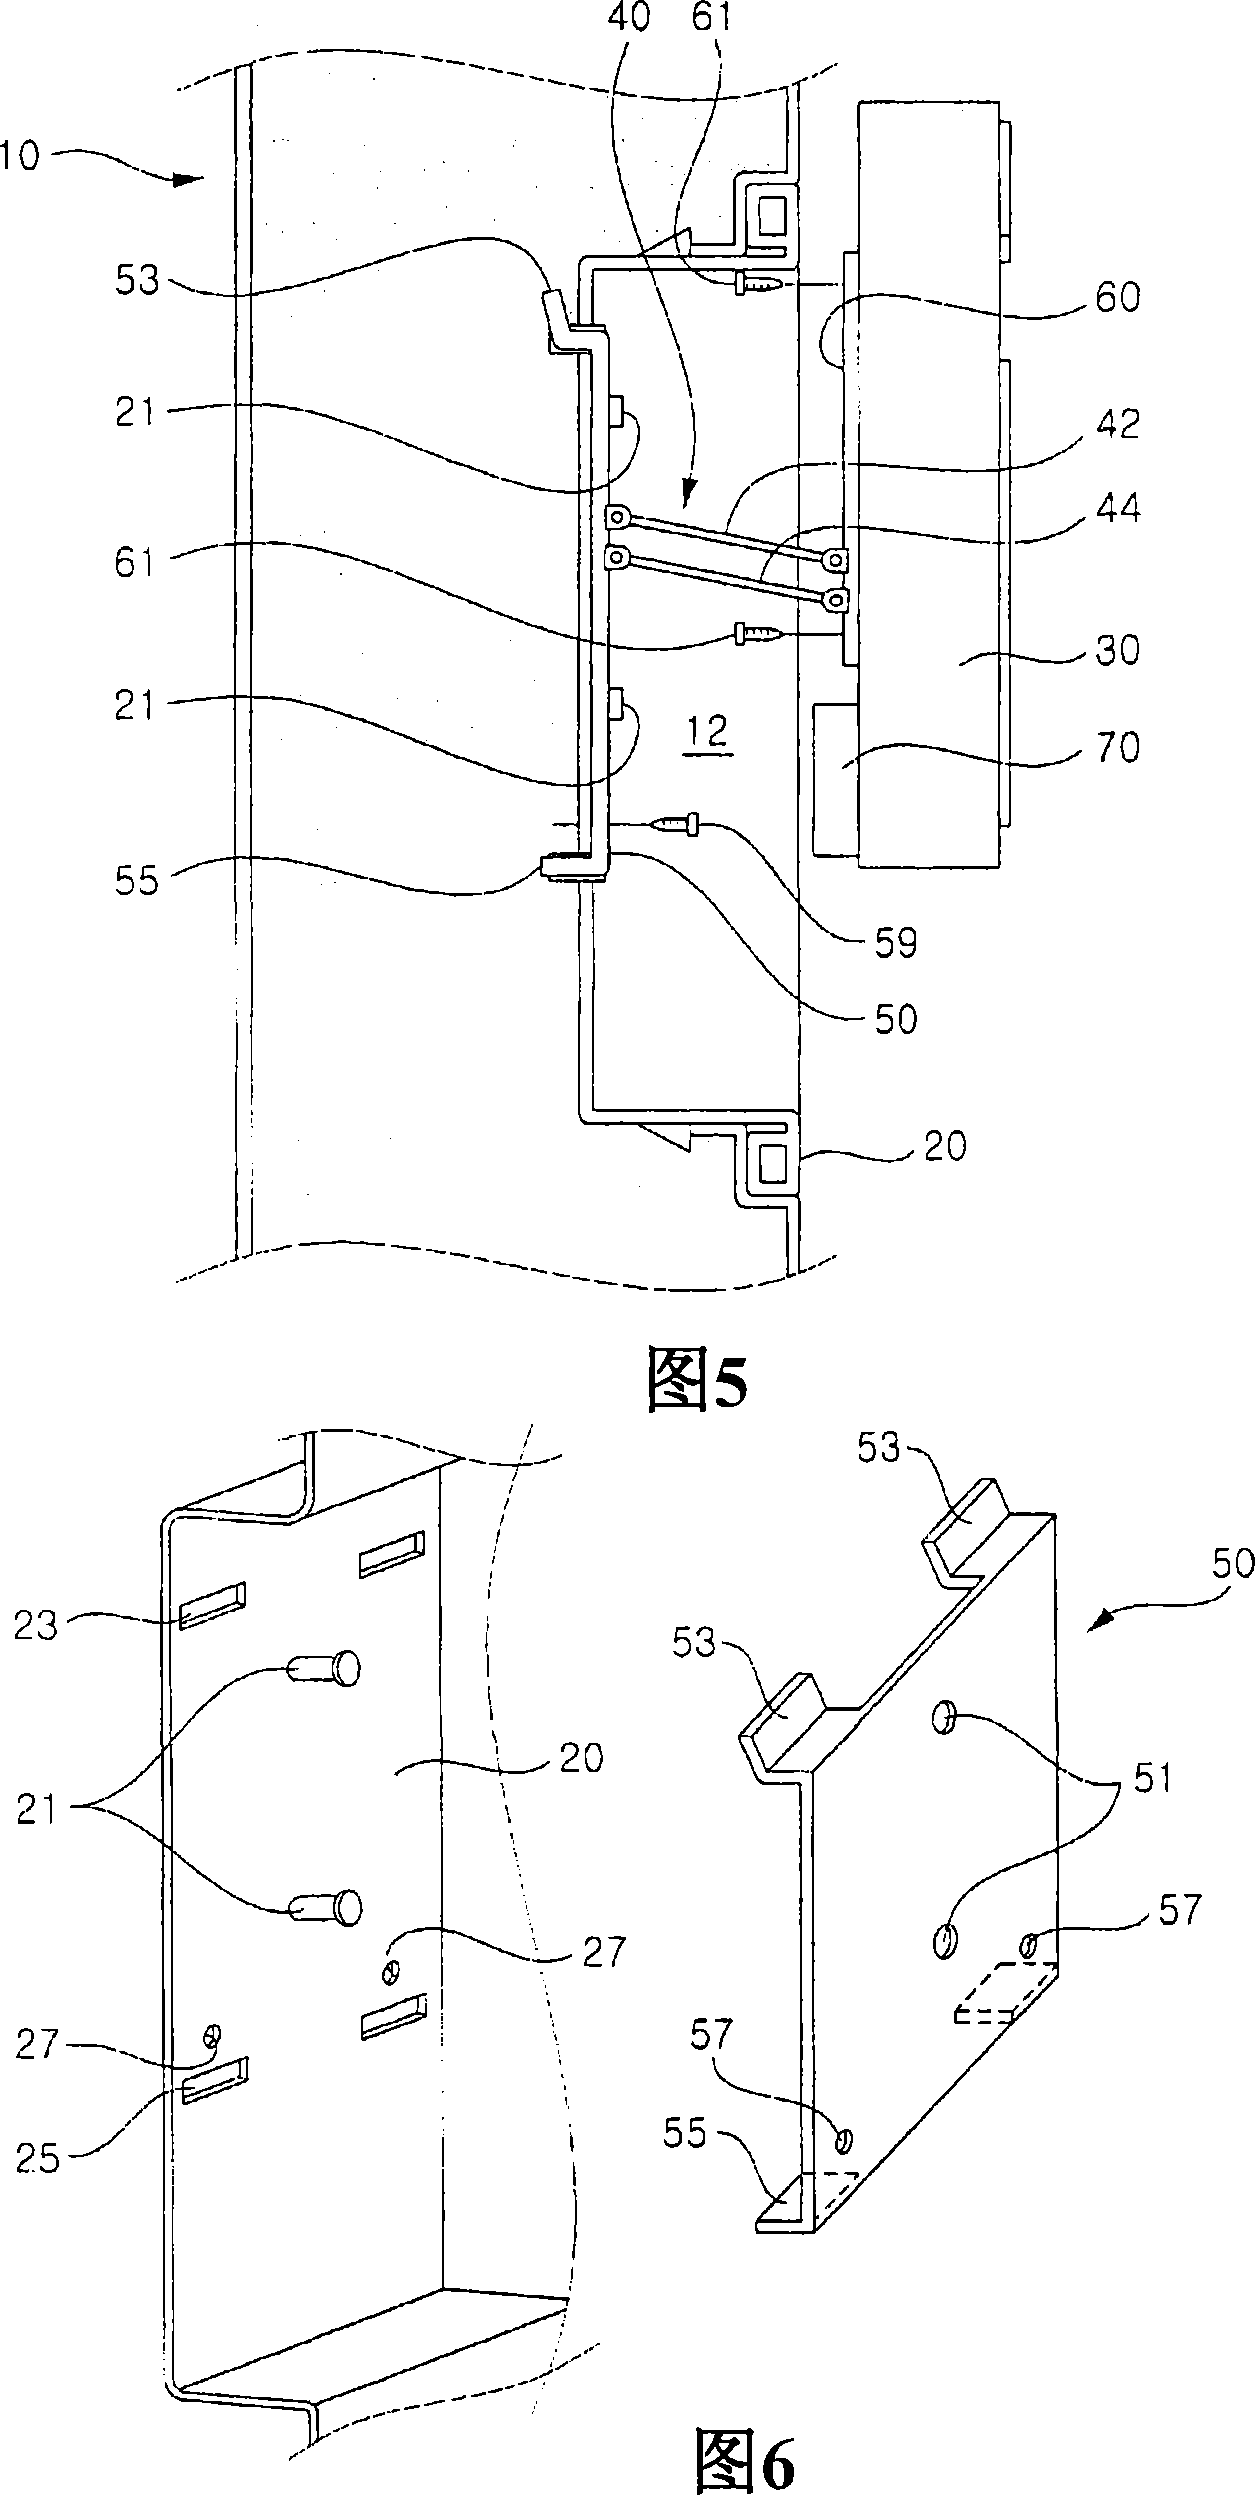 Display unit installing structure for refrigerator